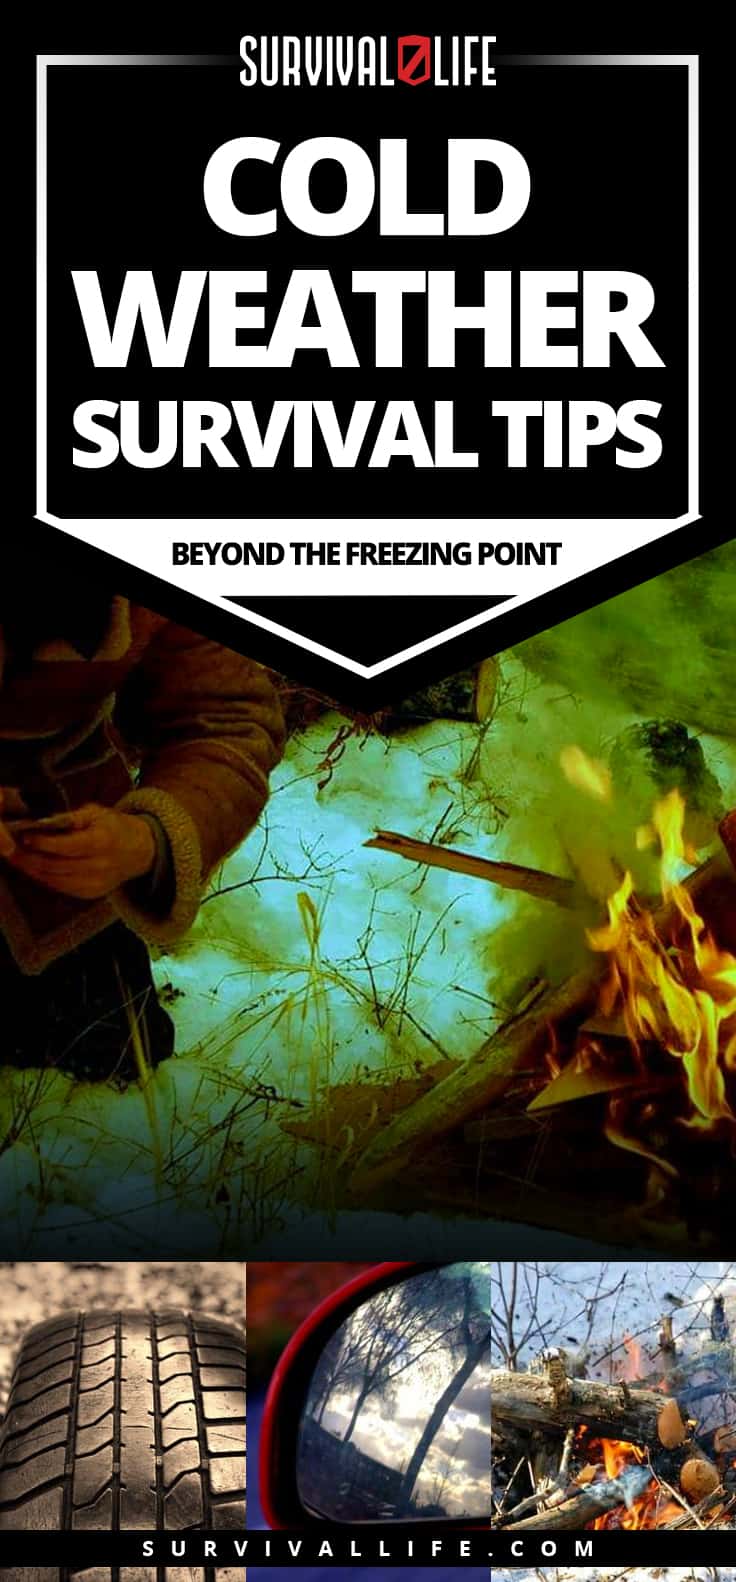 Beyond The Freezing Point | Cold Weather Survival Tips | how to survive in cold weather in the wilderness